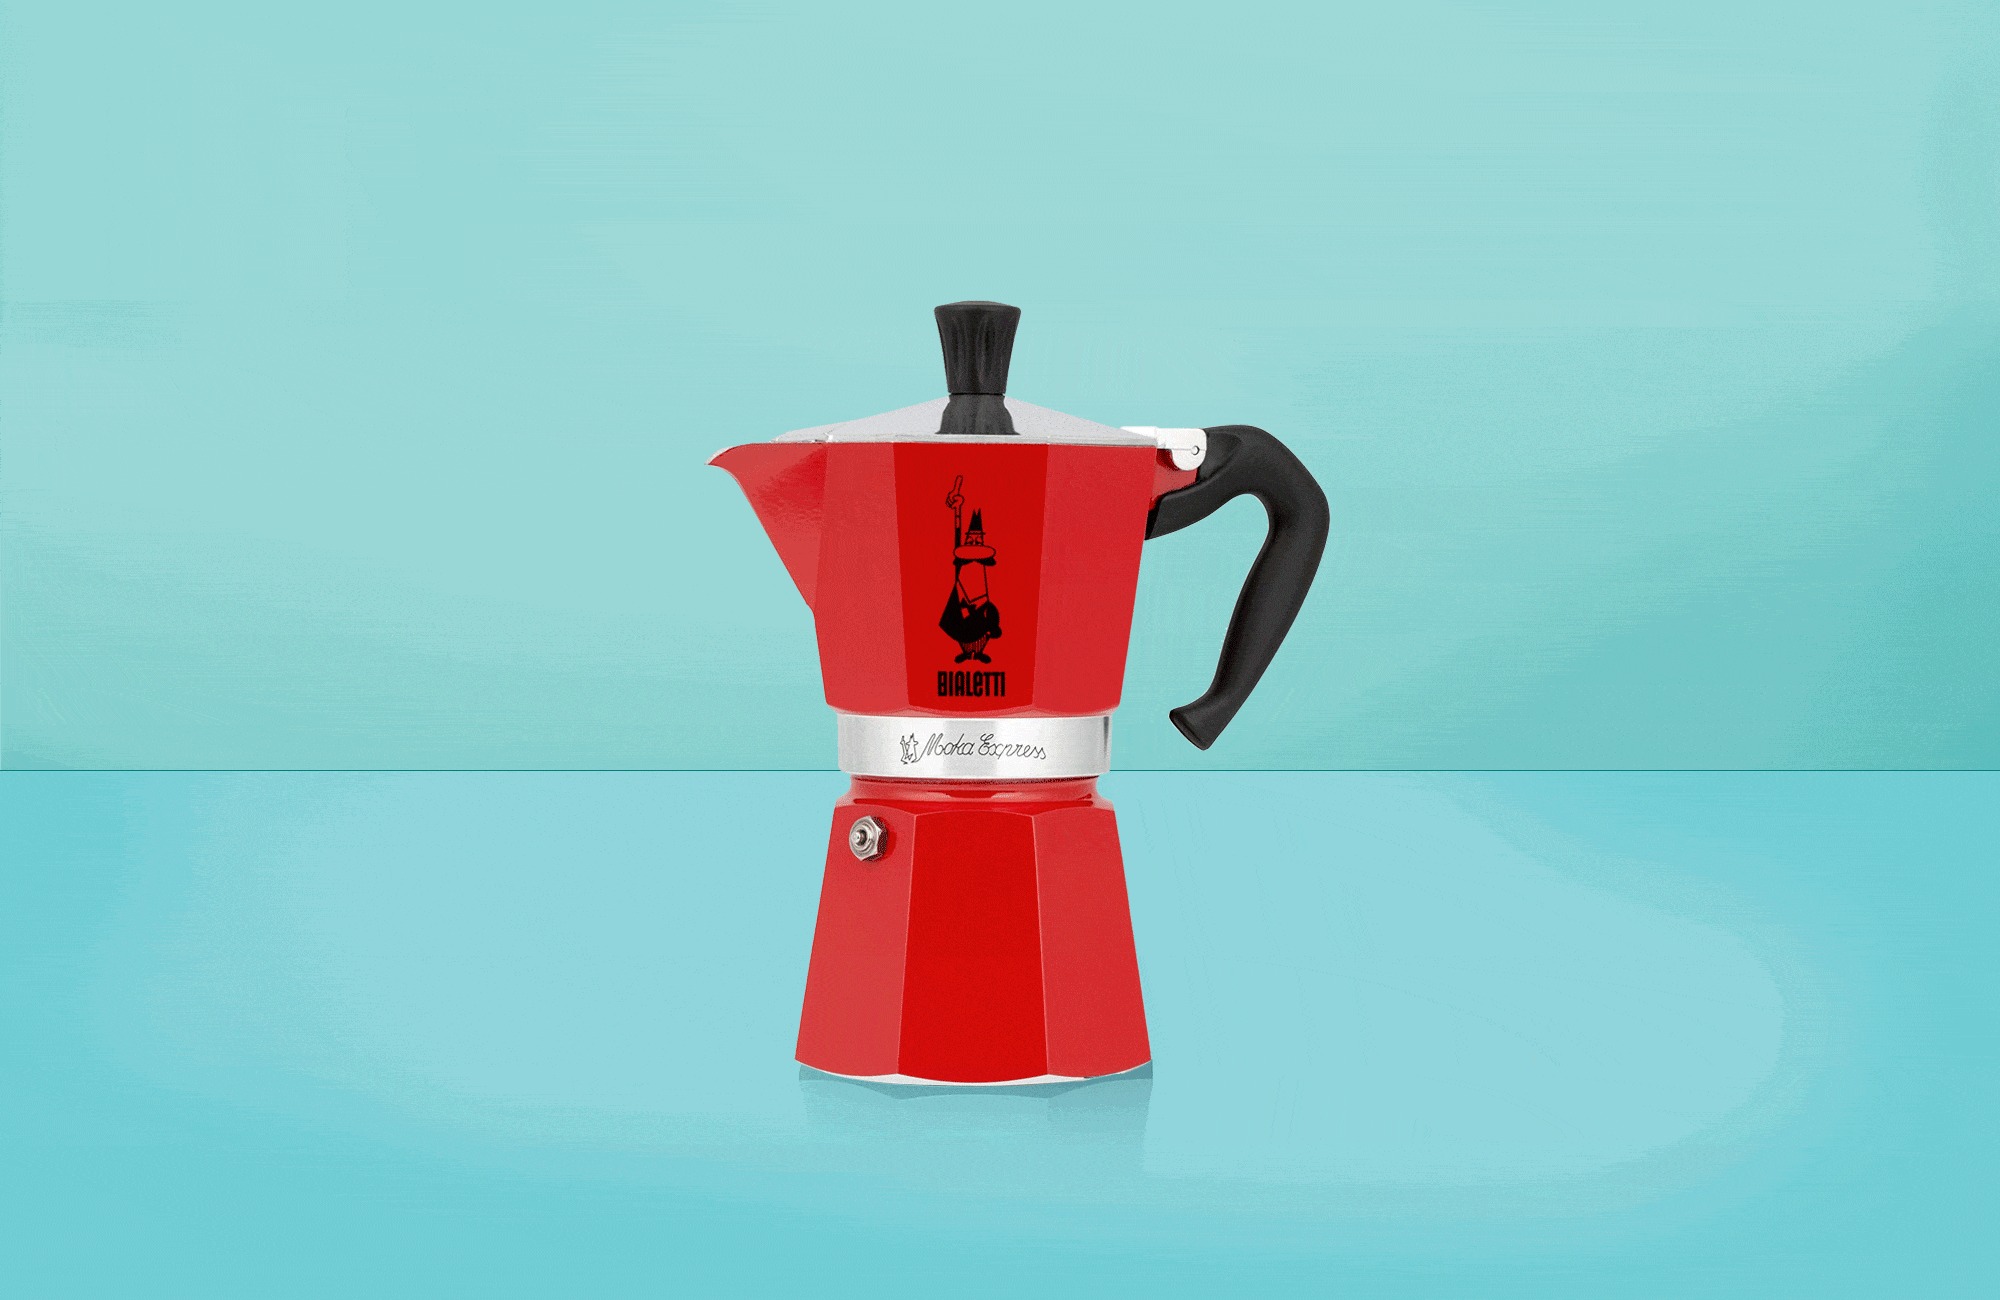 https://hips.hearstapps.com/hmg-prod/images/gh-040120-ghi-types-of-coffee-makers-1589213502.gif